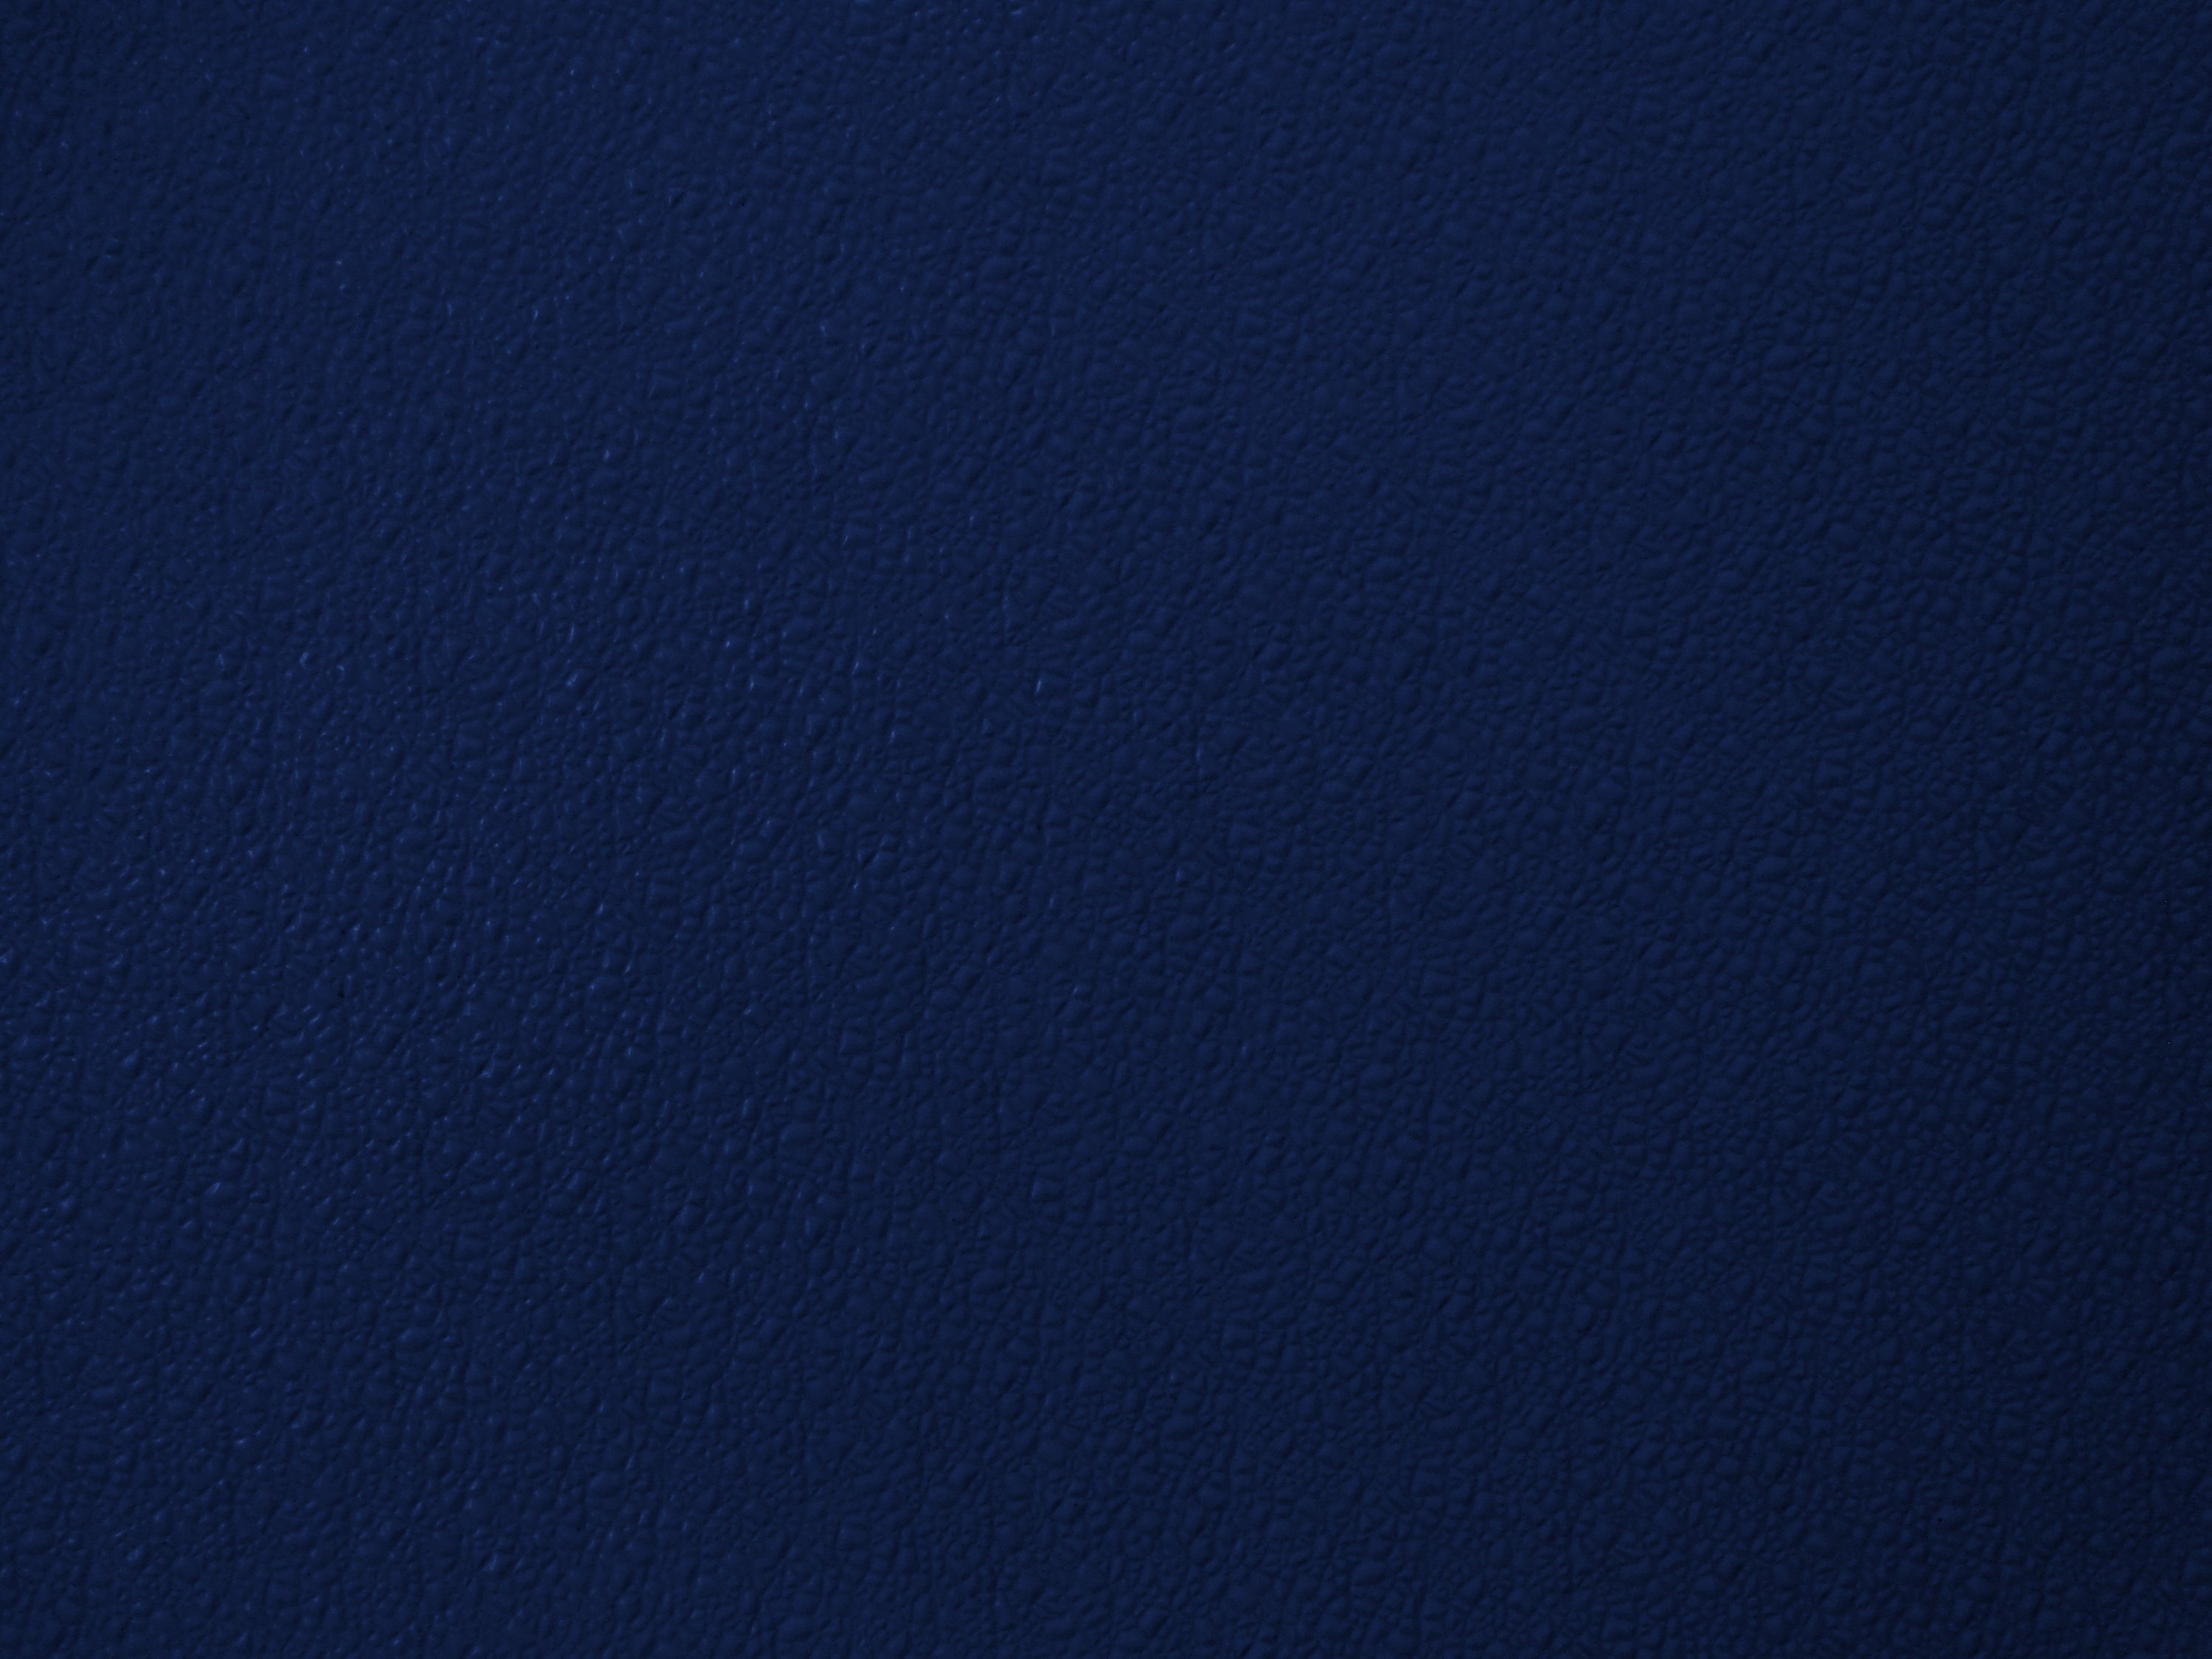 Navy blue and yellow wallpaper